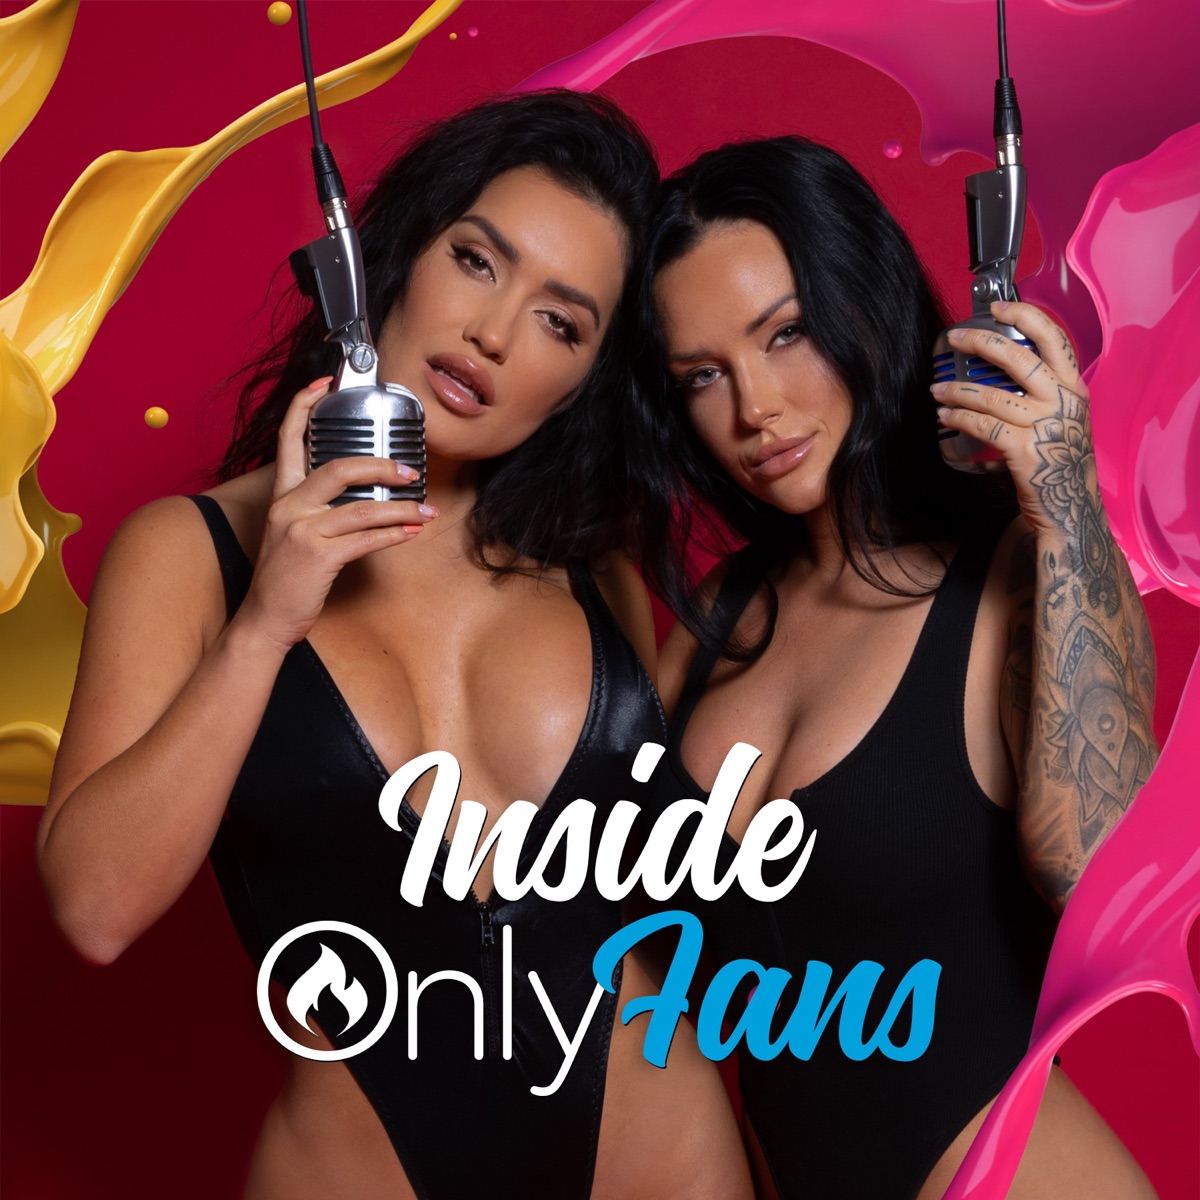 063 - Breaking Dicks & Exhibitionism w Carlotta Champagne – Inside OnlyFans  – Podcast – Podtail